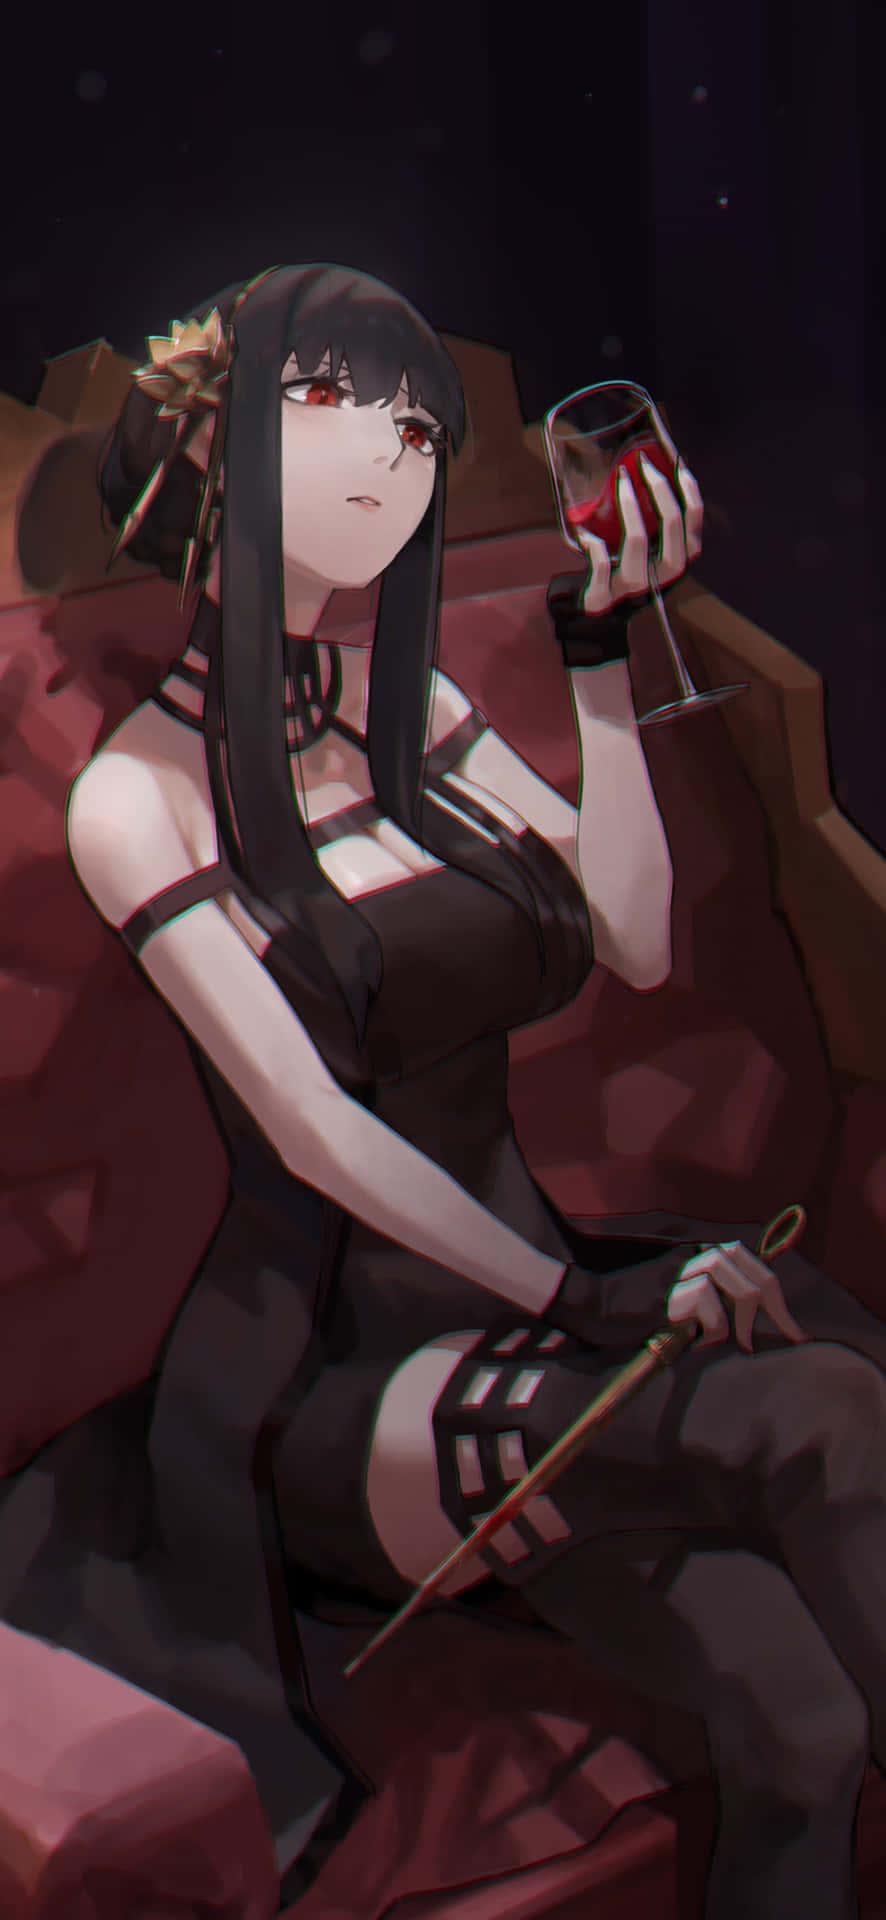 Gothic Anime Girl With Wine Glass Wallpaper